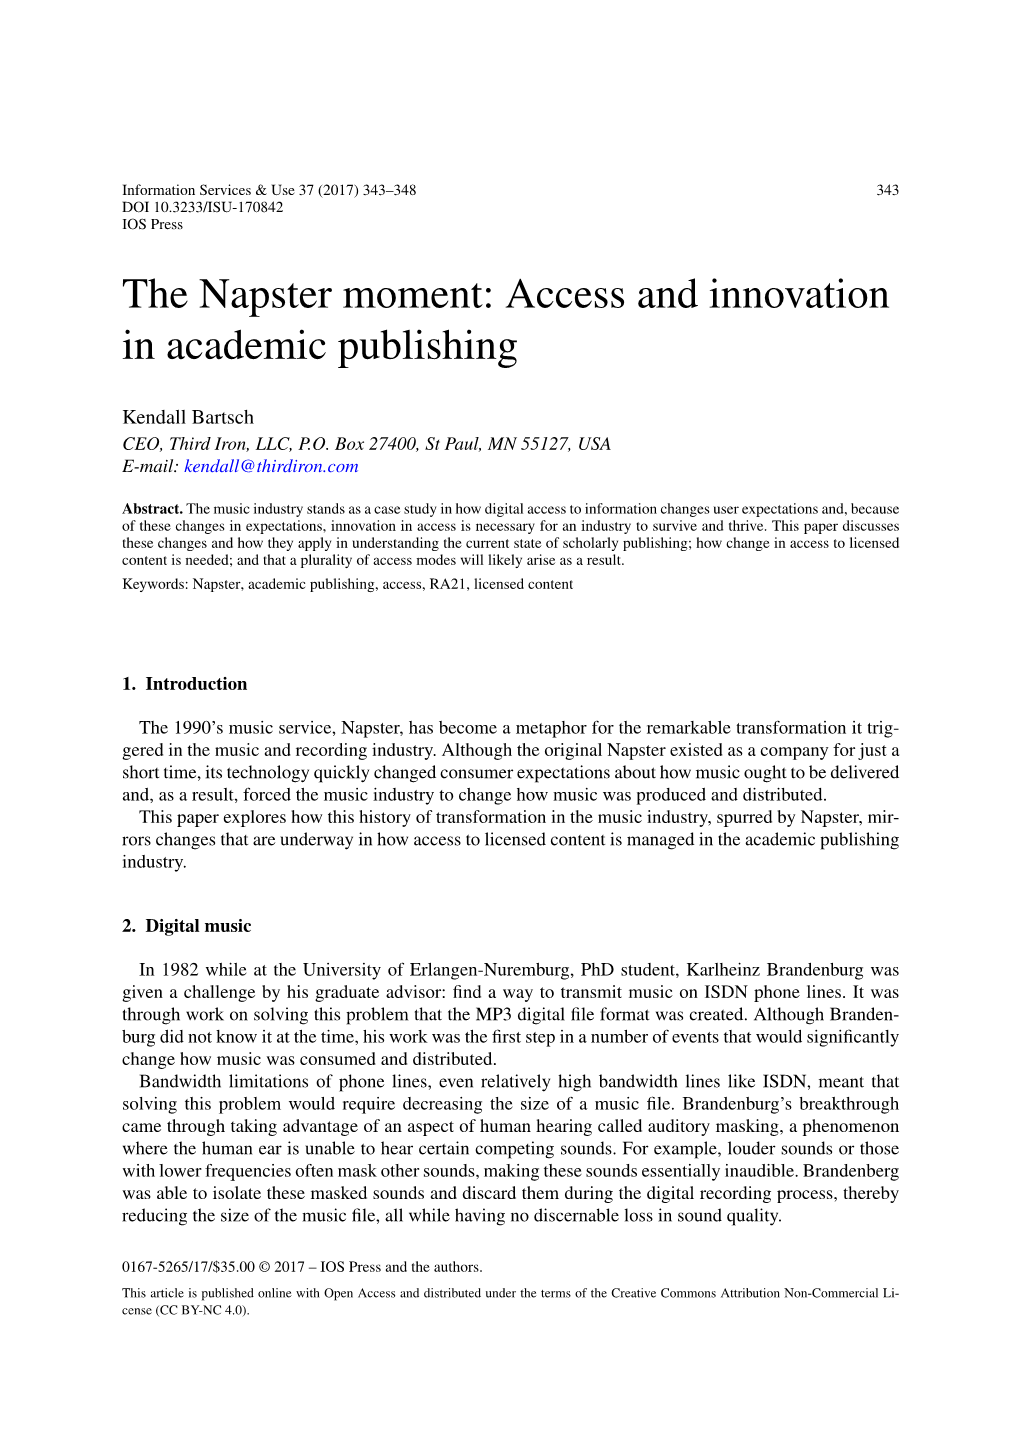 The Napster Moment: Access and Innovation in Academic Publishing